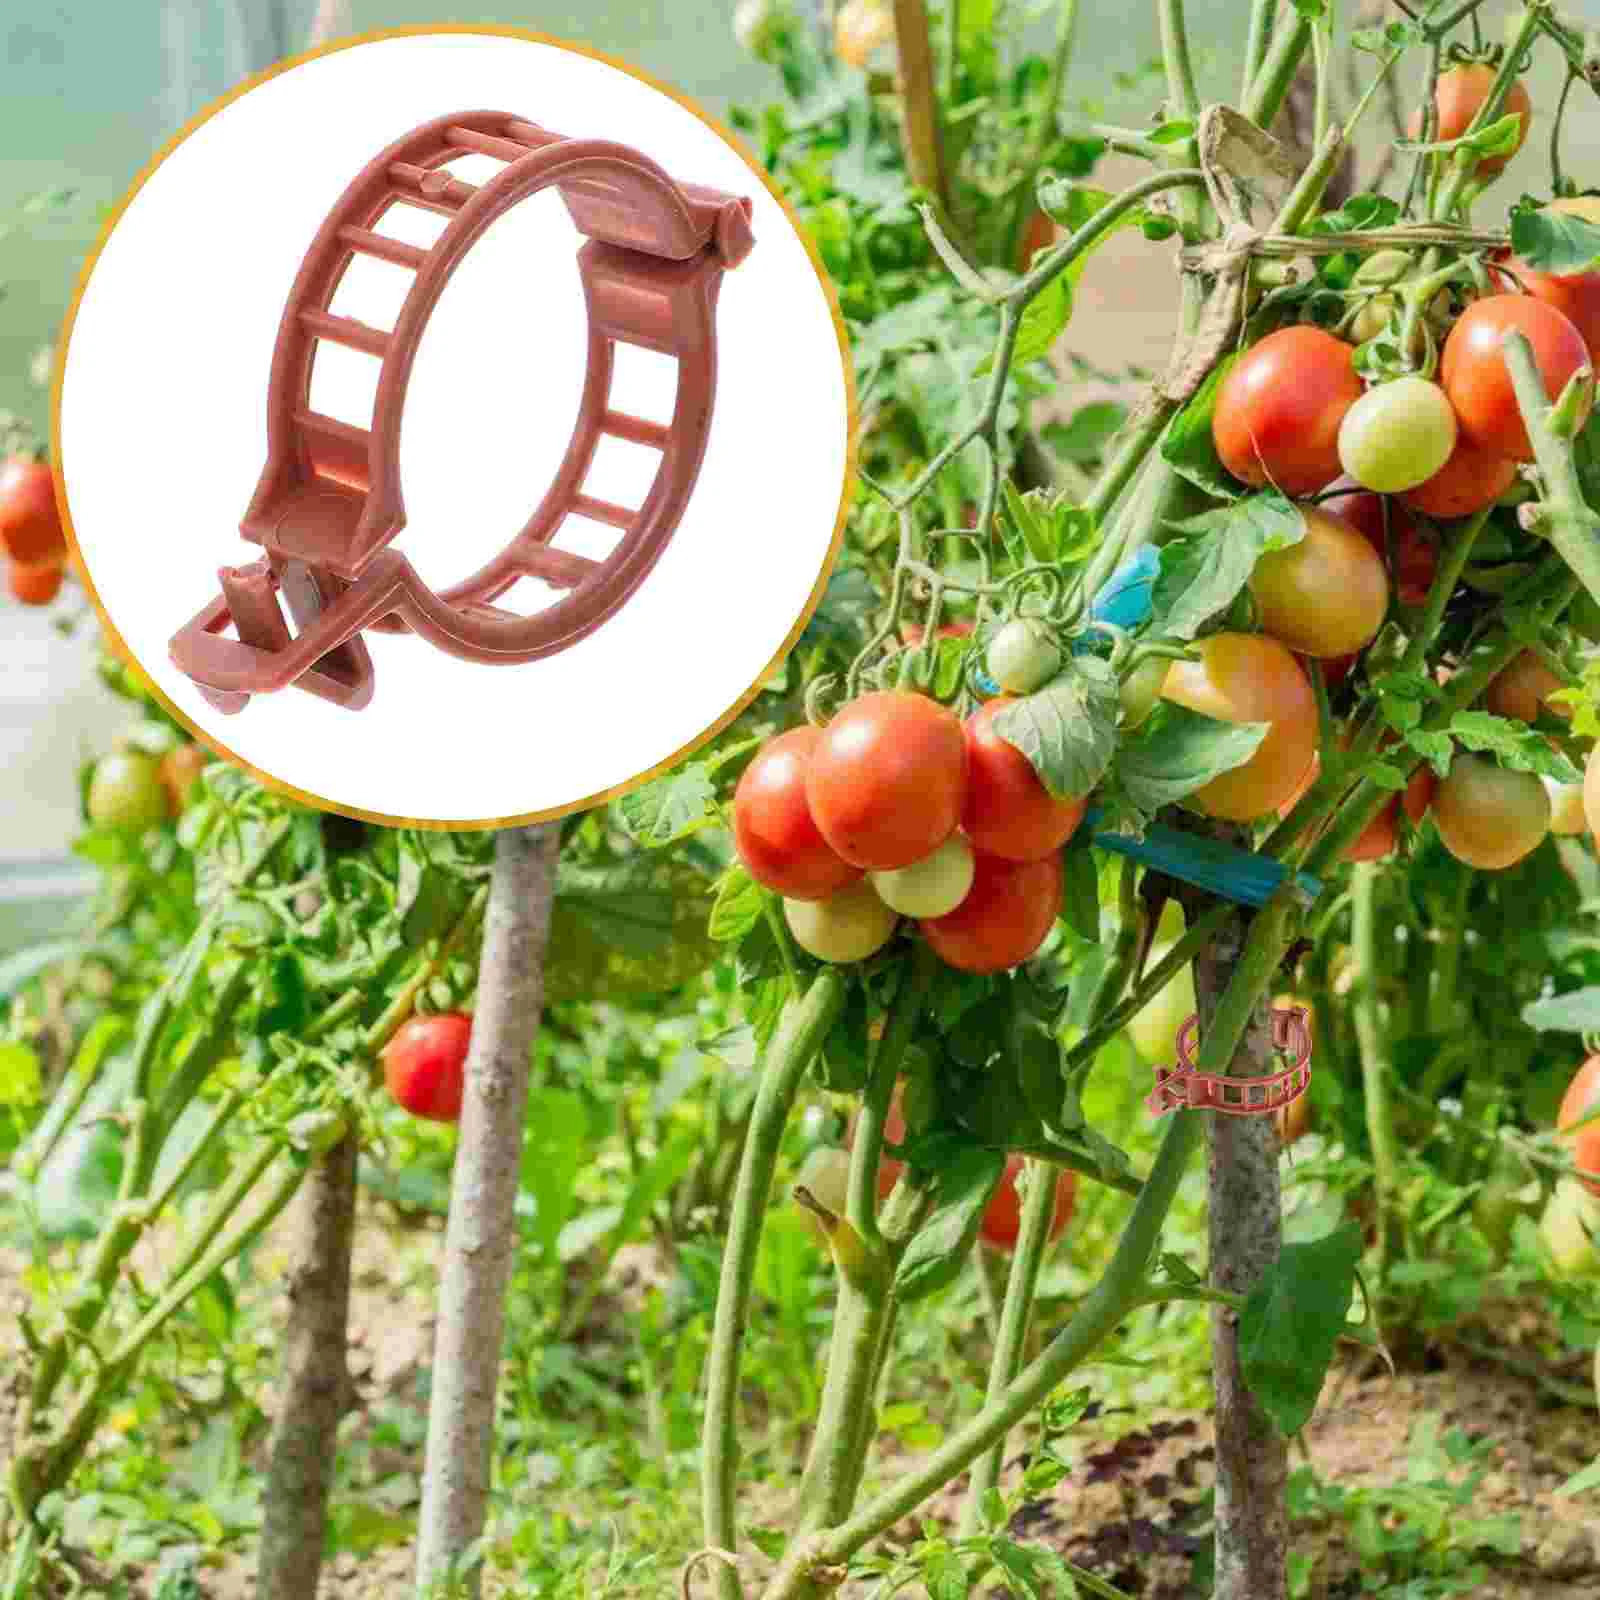 

100 Pcs Clips Plastic Support Greenhouse Cucumber Tomato Stem Supports Flower Vegetable Plantssss Gardening Vine Fixing Cage